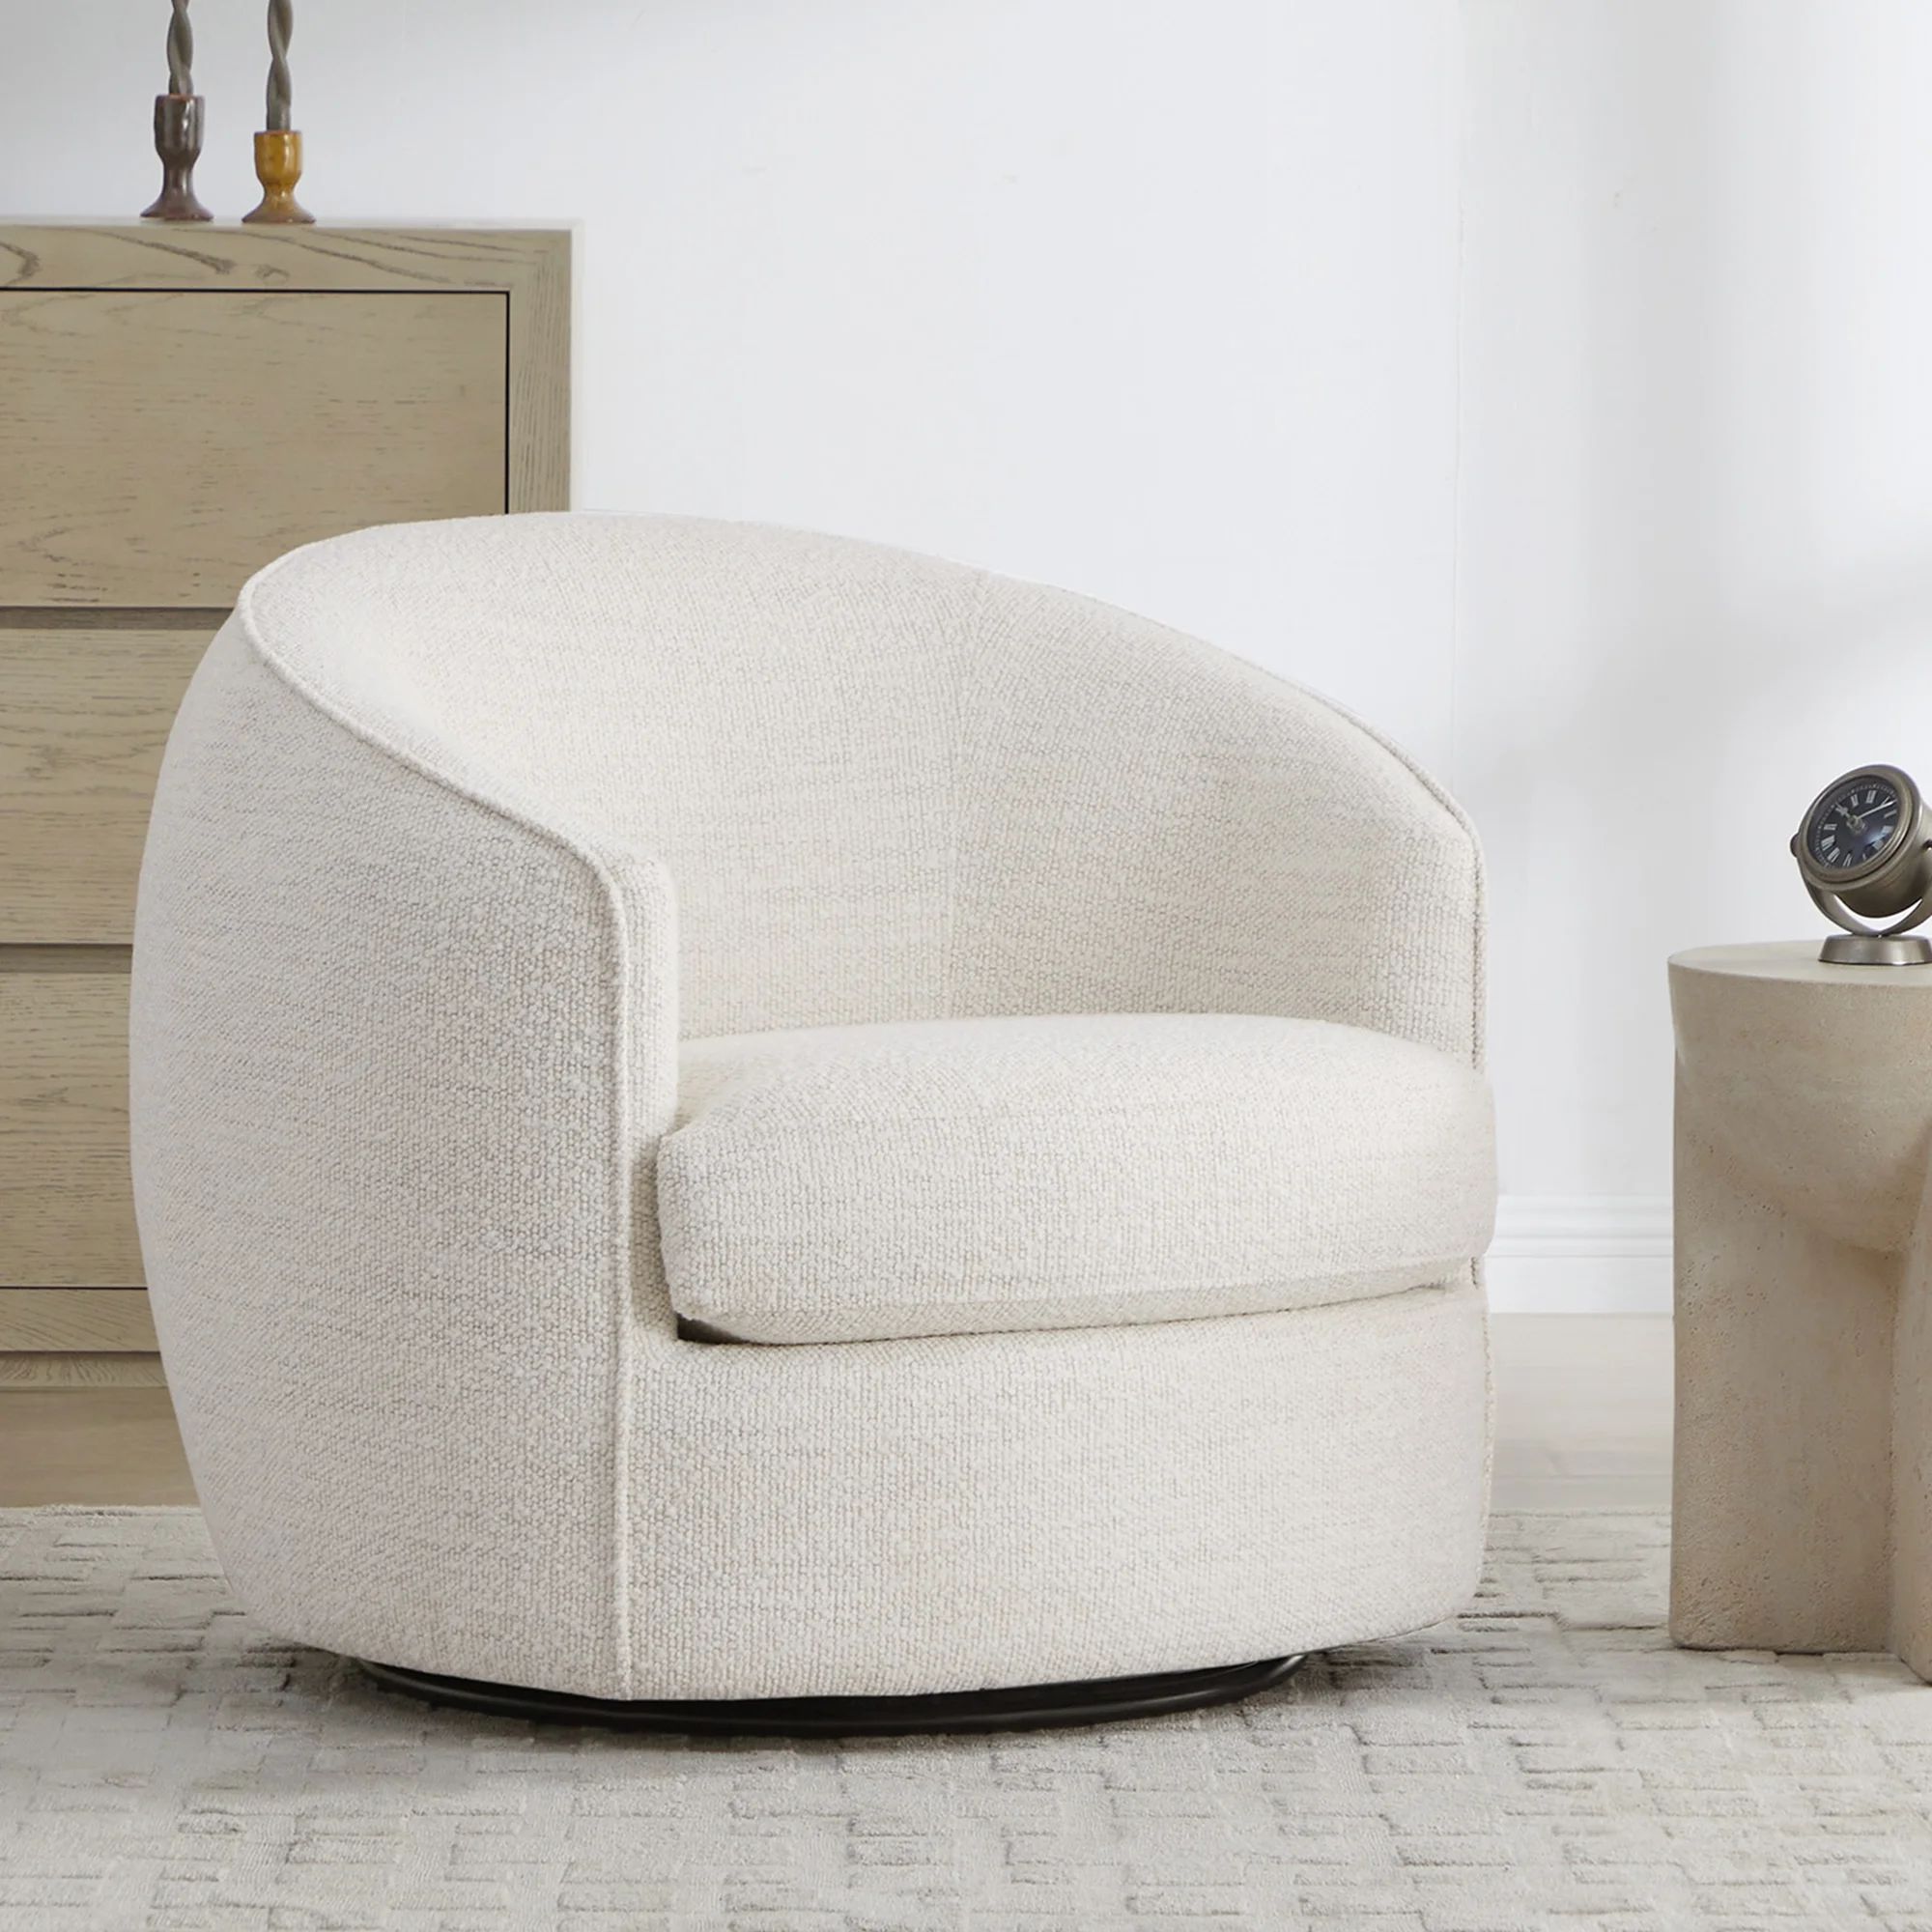 CHITA Modern Swivel Accent Chairs, Round Barrel Chair for Living Room Bedroom, Fabric in Cream | Walmart (US)